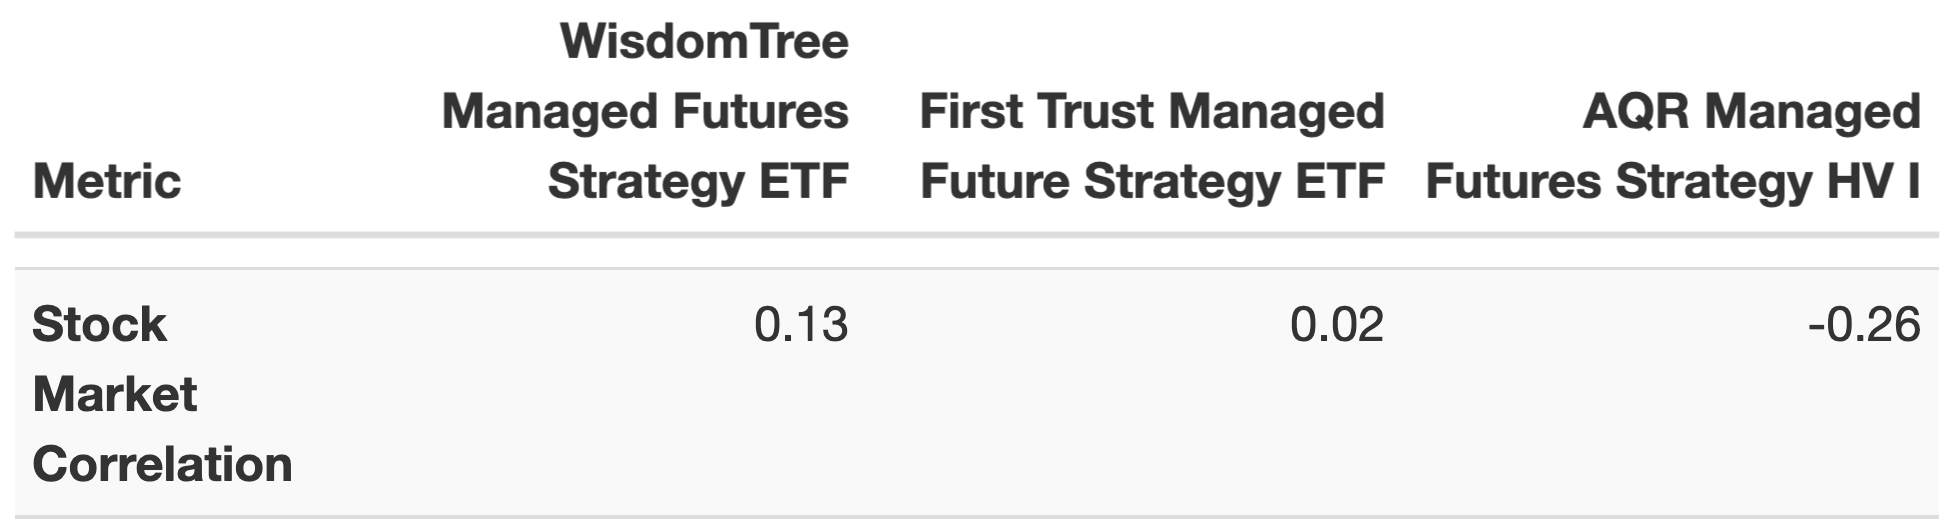 Managed Futures ETFs and Mutual Funds WisdomTree Managed Futures Strategy ETF, First Trust Managed Futures Strategy ETF and AQR Managed Futures Strategy HV I